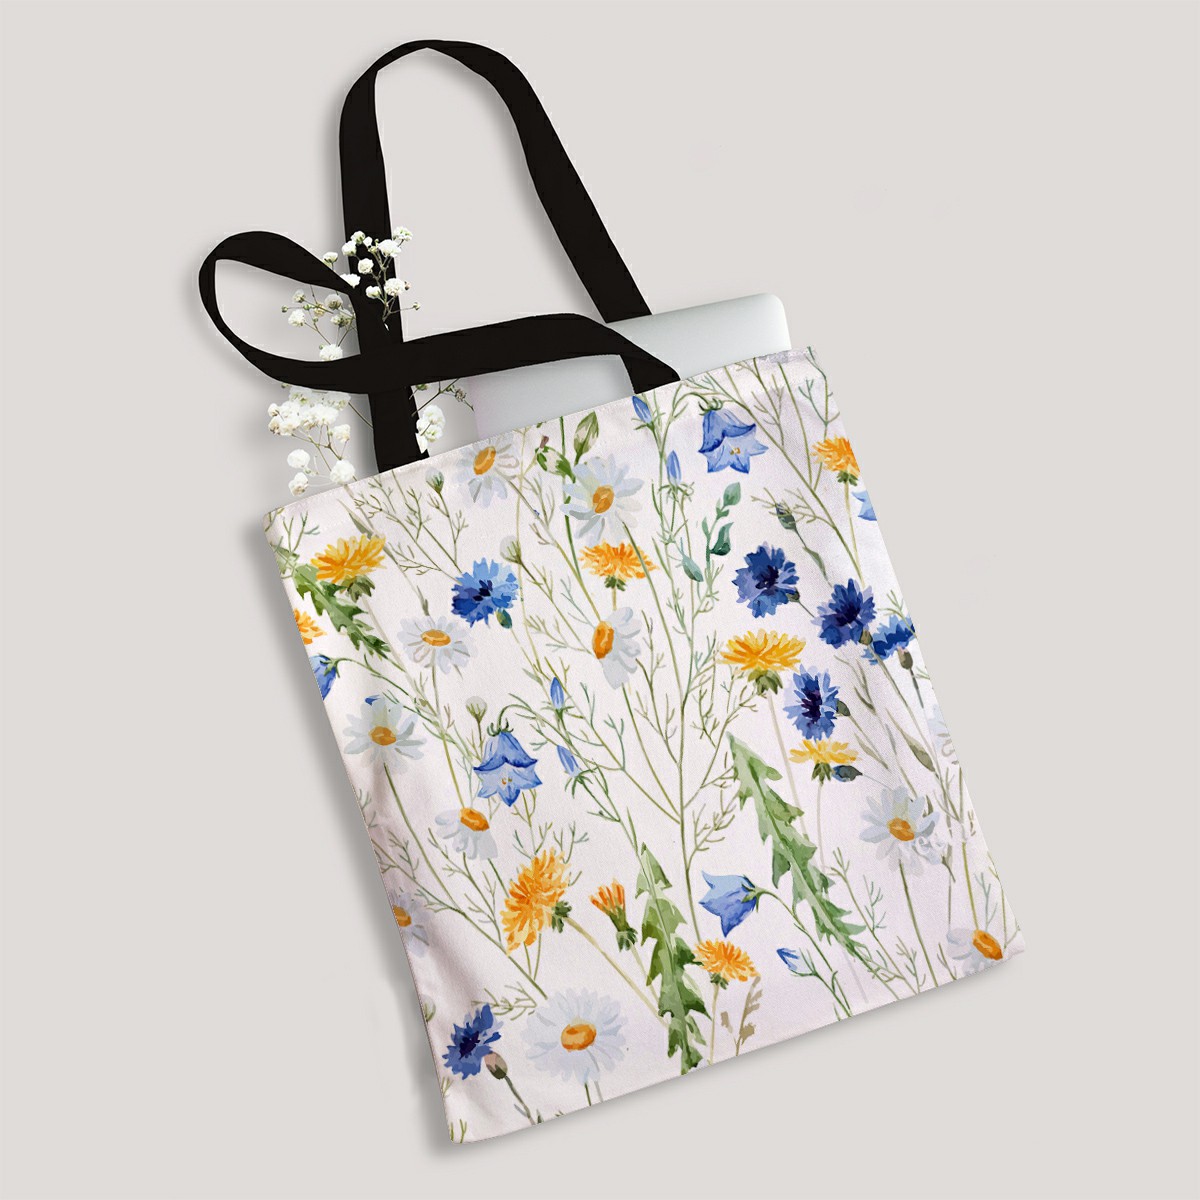 ECZJNT watercolor dandelion cornflower delicate flower Canvas Bag Reusable Tote Grocery Shopping Bags Tote Bag 14"(W) x 16"(H) - image 1 of 1